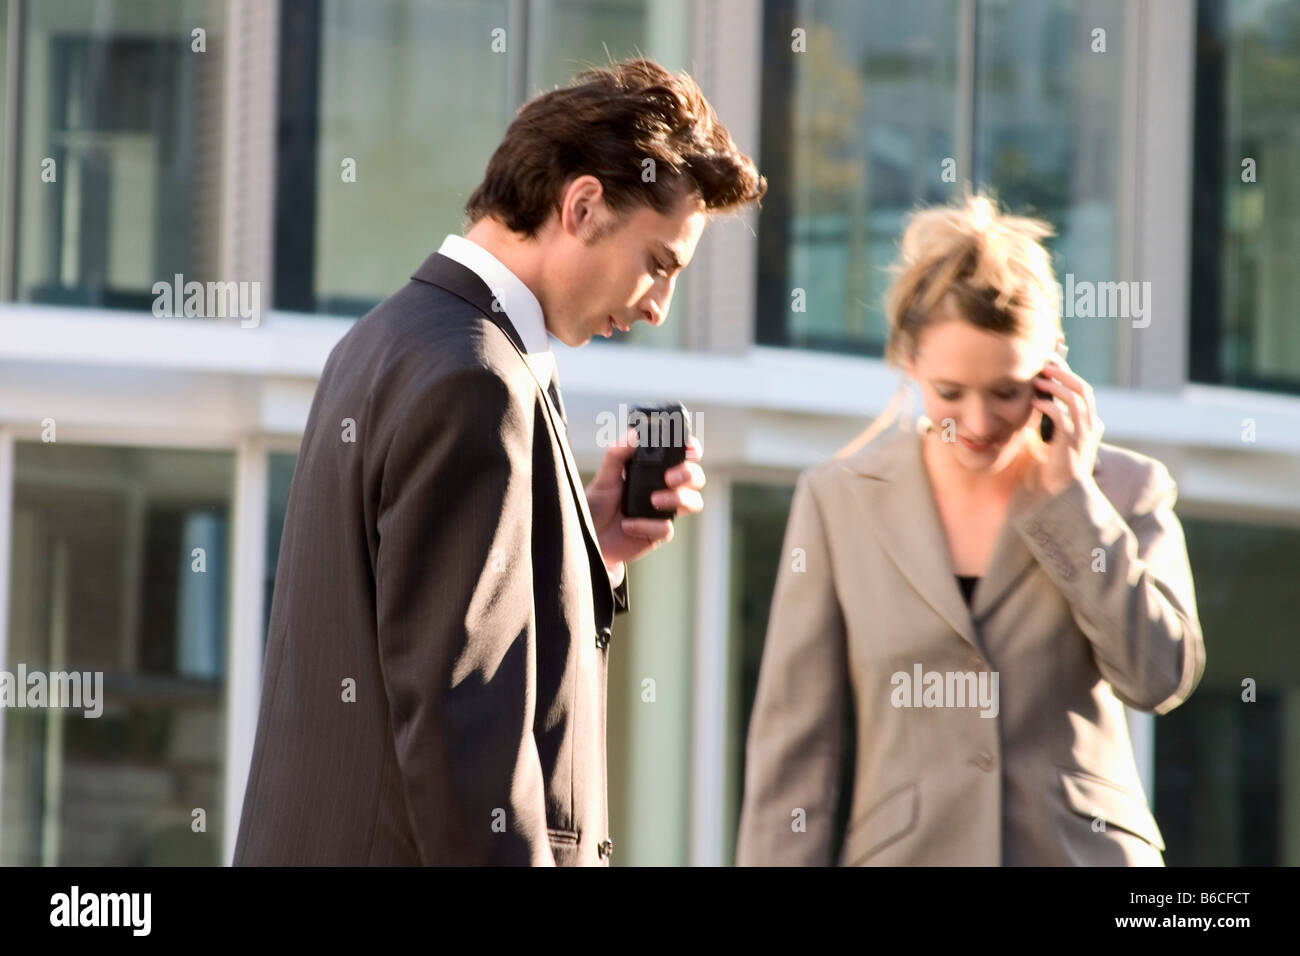 Businessman and businesswoman using mobile phones Banque D'Images